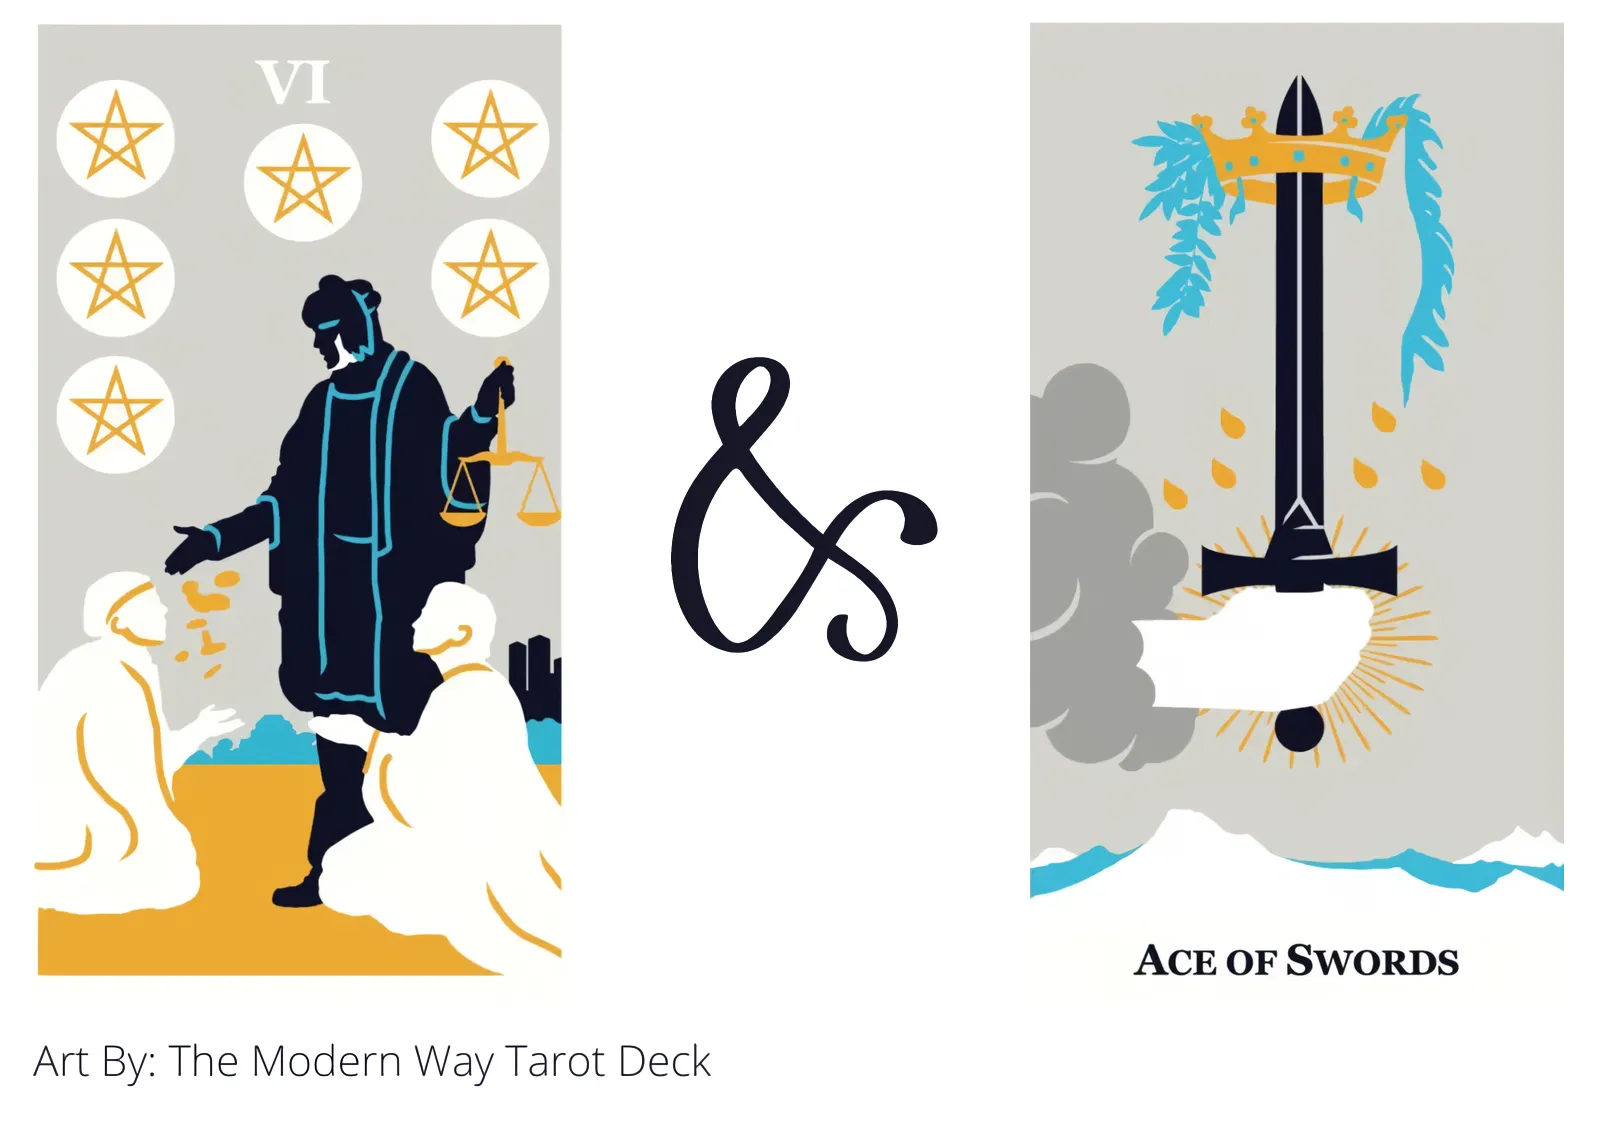 six of pentacles and ace of swords tarot cards together